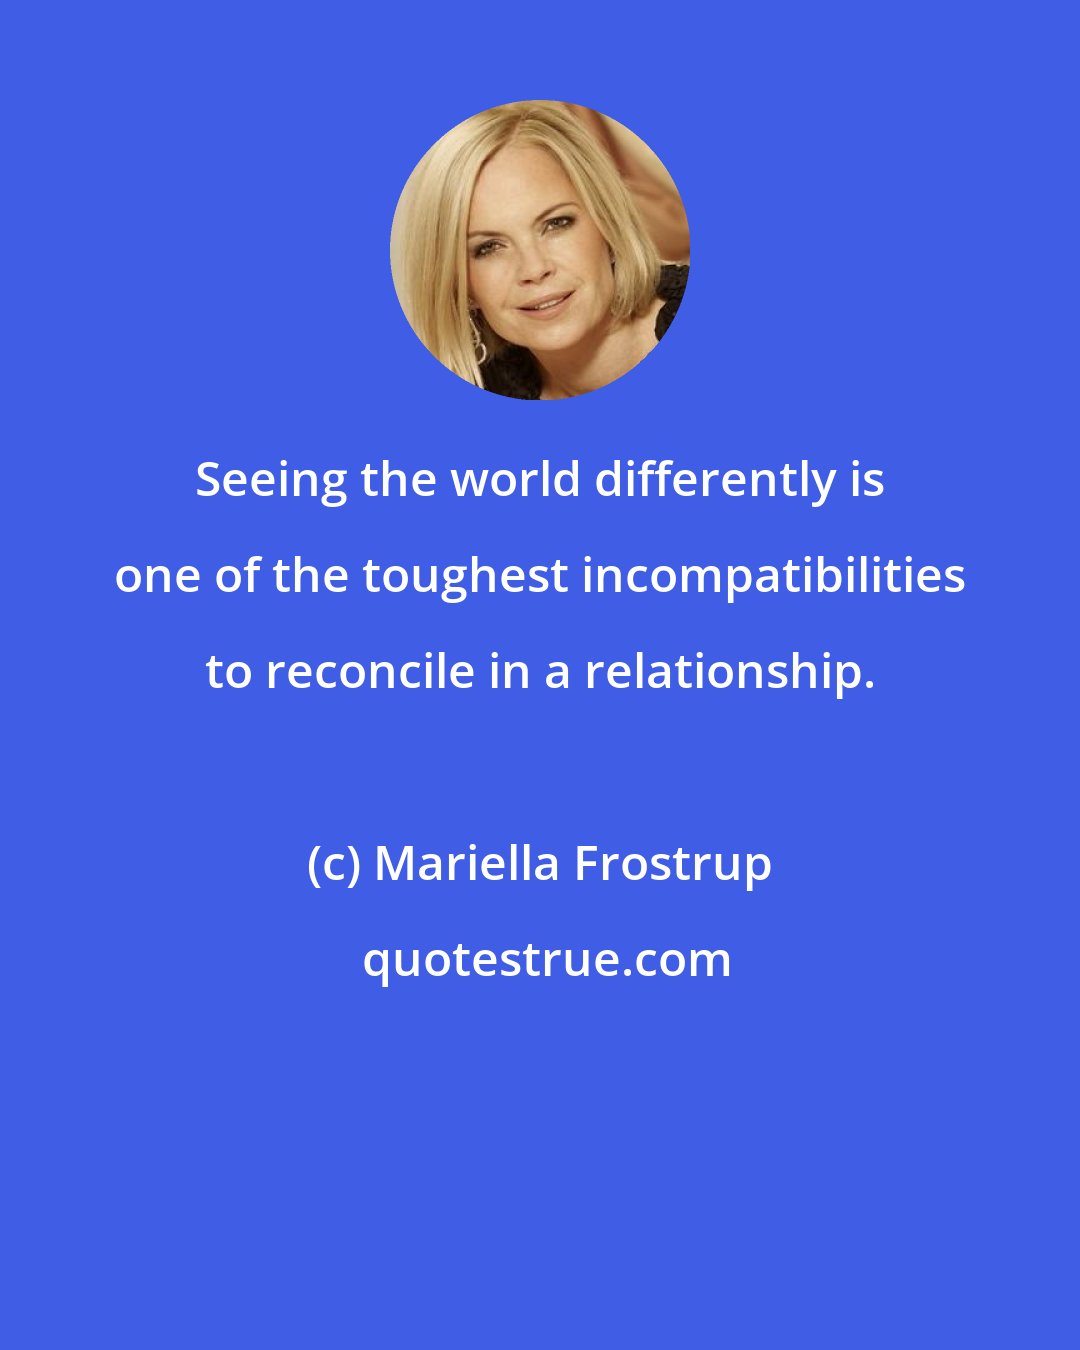 Mariella Frostrup: Seeing the world differently is one of the toughest incompatibilities to reconcile in a relationship.